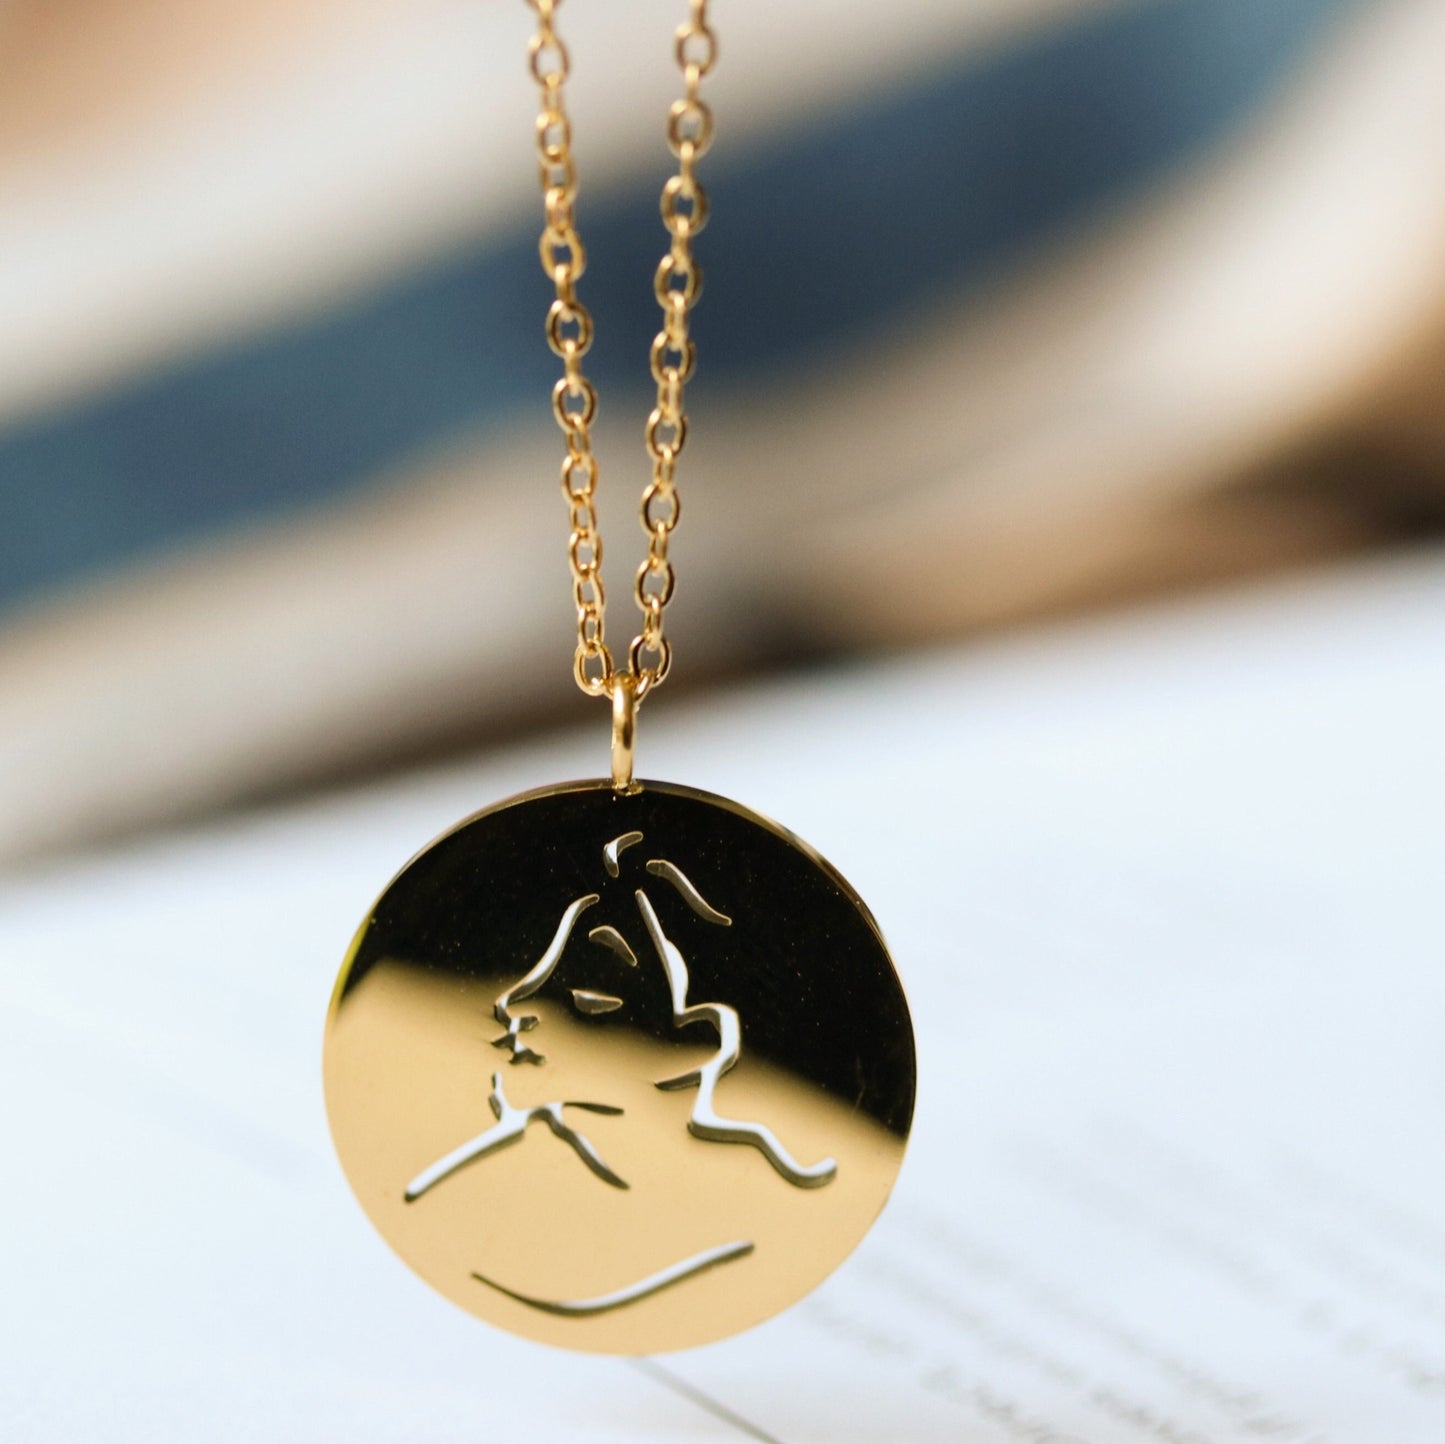 Sister Gift / Gold Sister Necklace / Gold Minimalist Disc Necklace /Stainless Steel Gold Necklace /Water Proof Minimalist Woman Jewellery